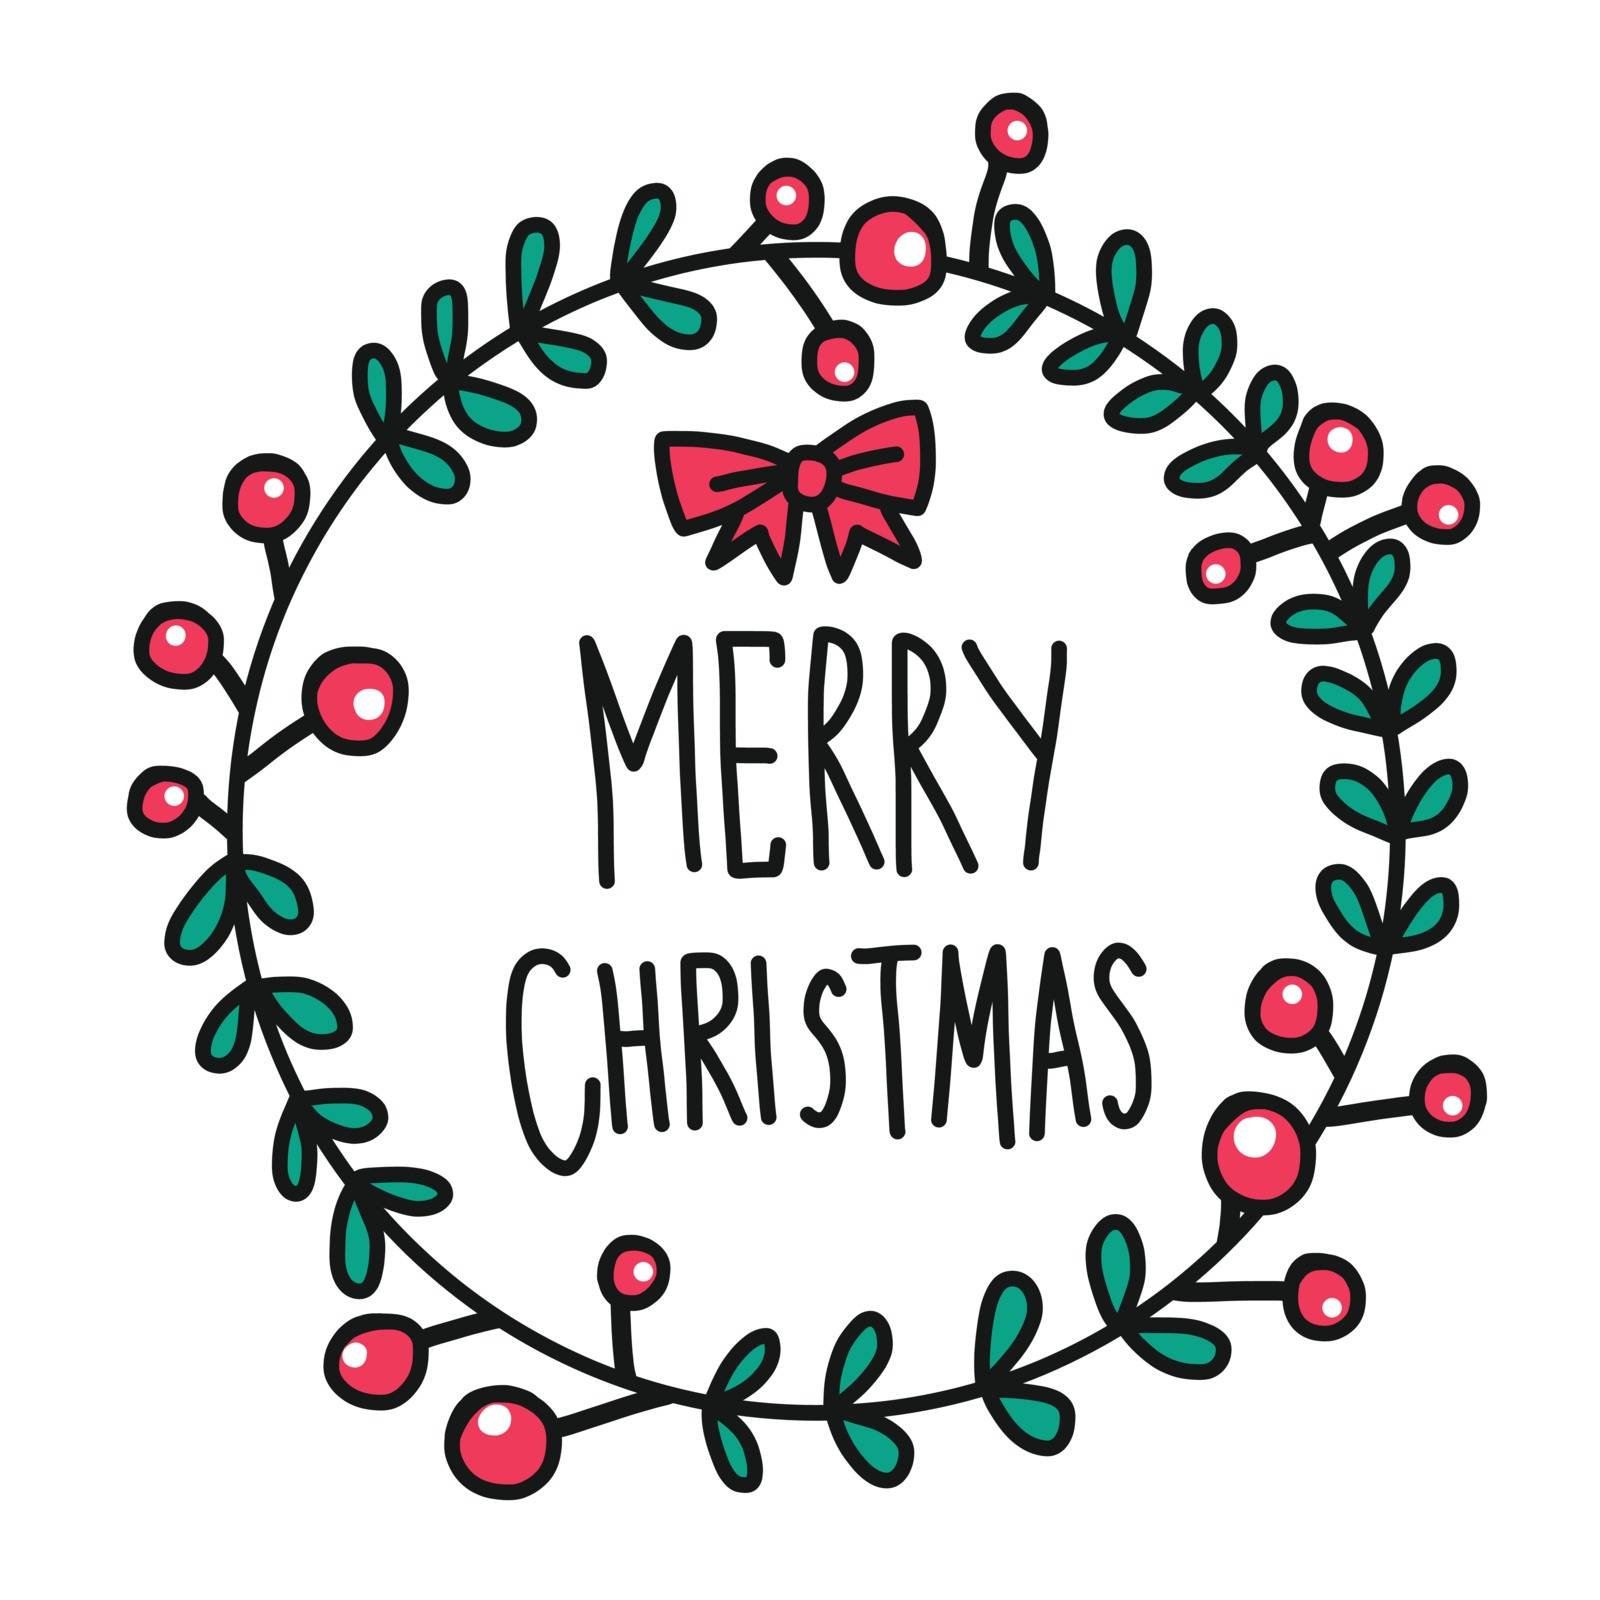 Merry Christmas word in cure flower wreath doodle style vector illustration